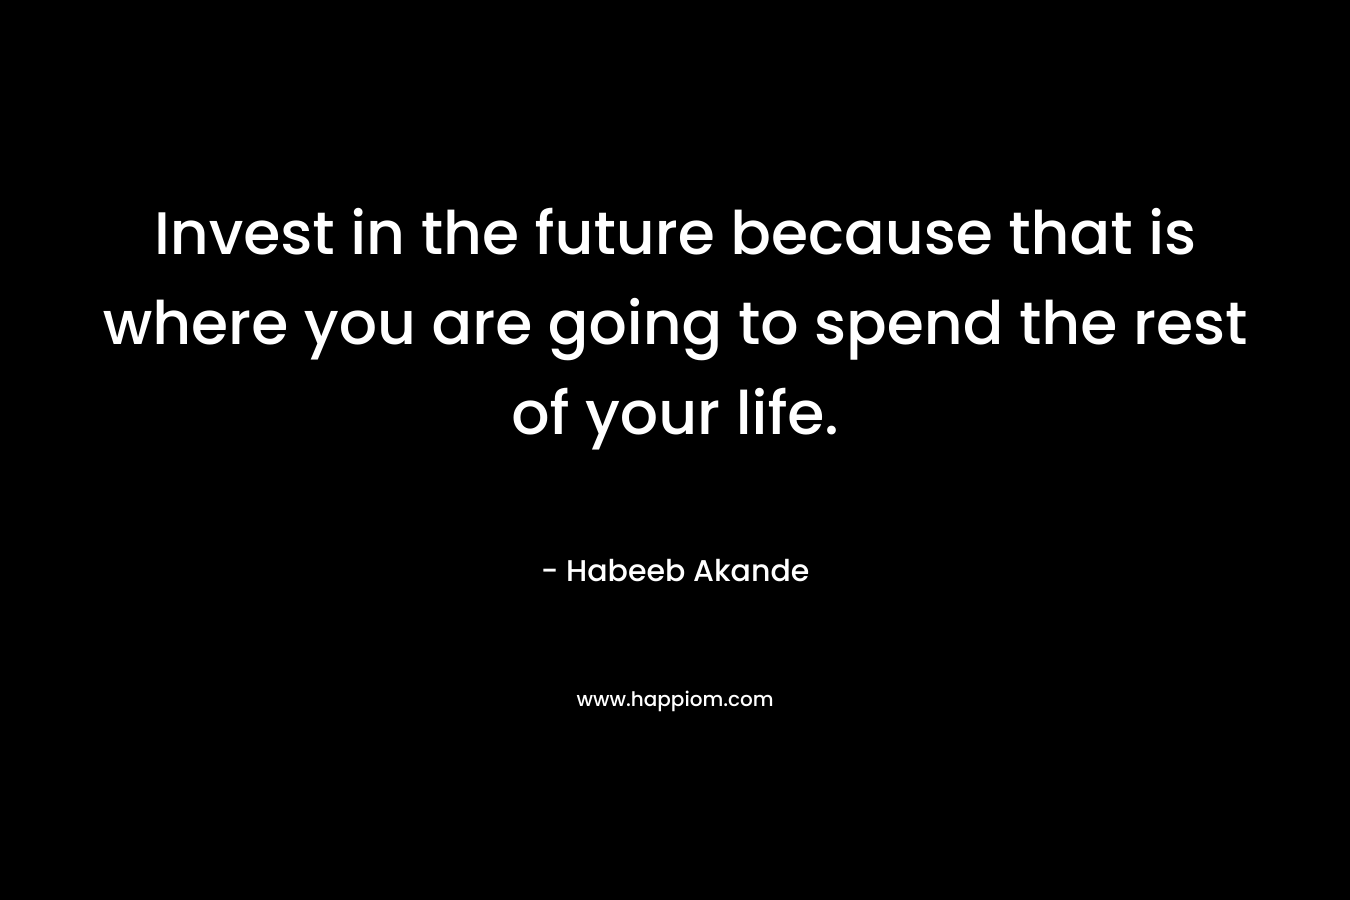 Invest in the future because that is where you are going to spend the rest of your life.